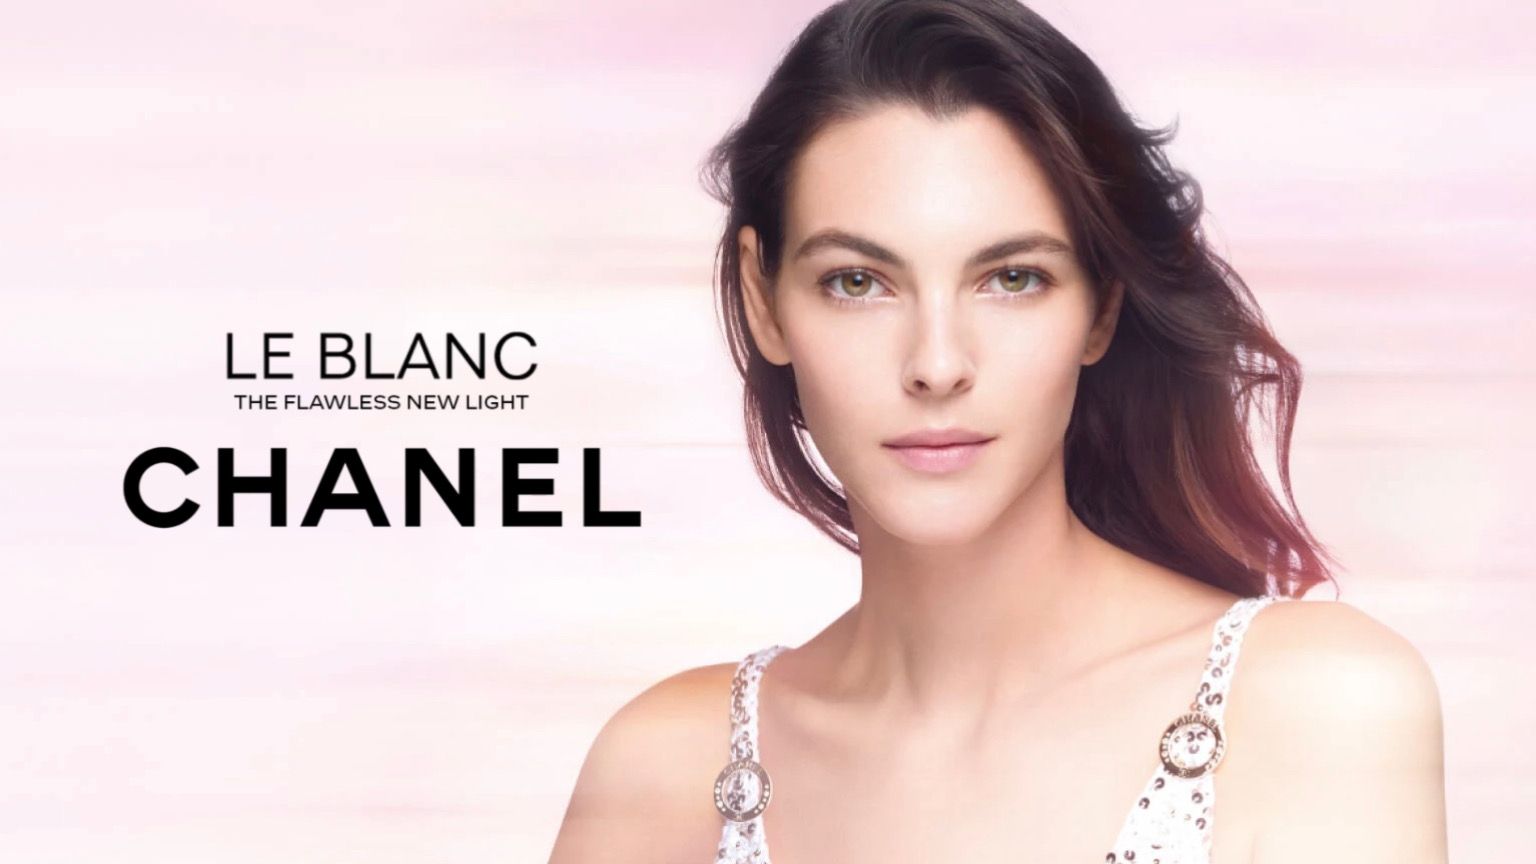 The flawless new light - Chanel